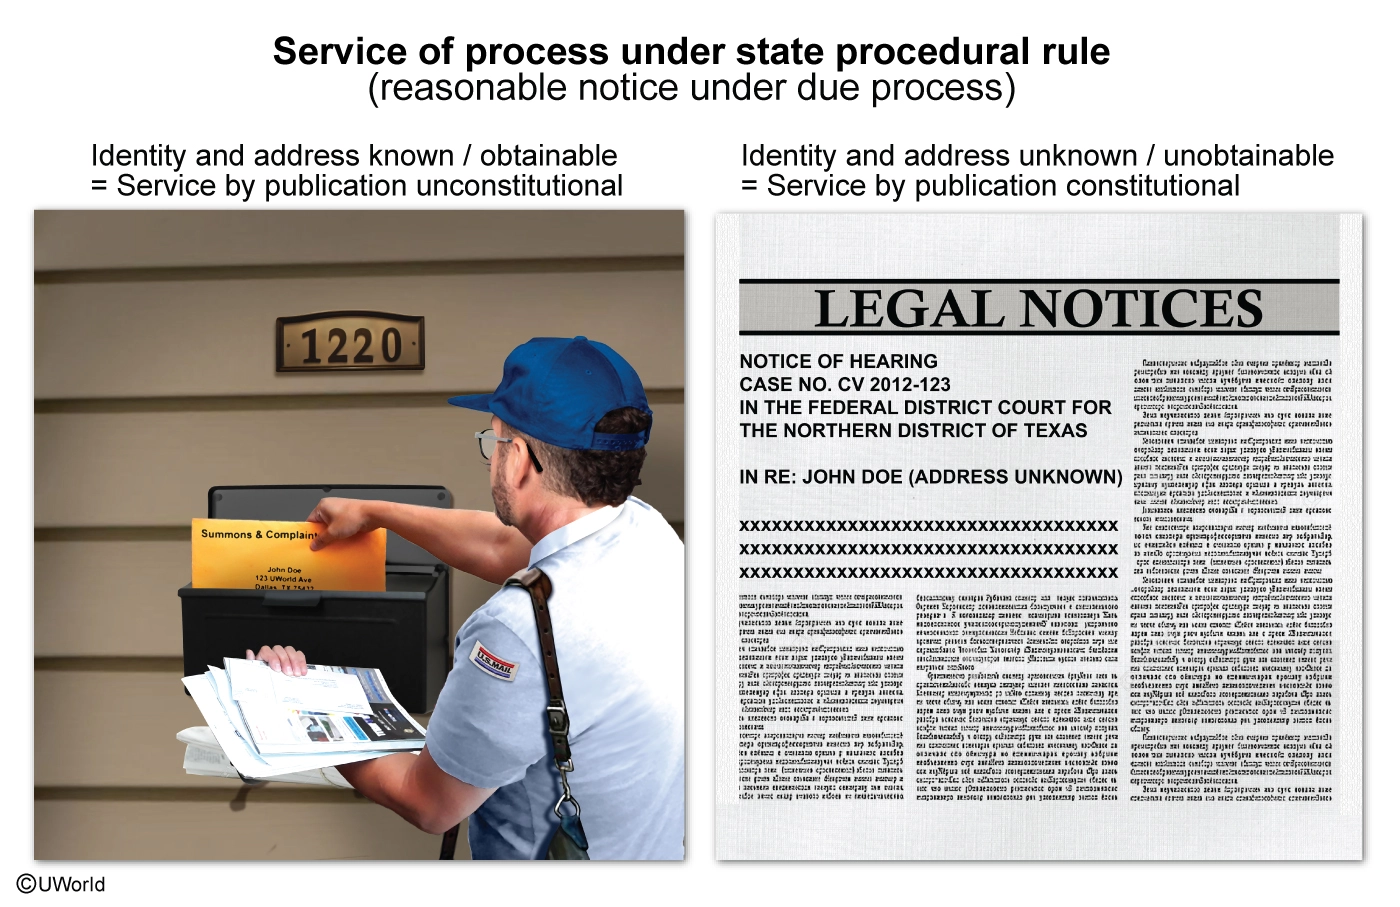 Service of Process under state procedural rule illustration